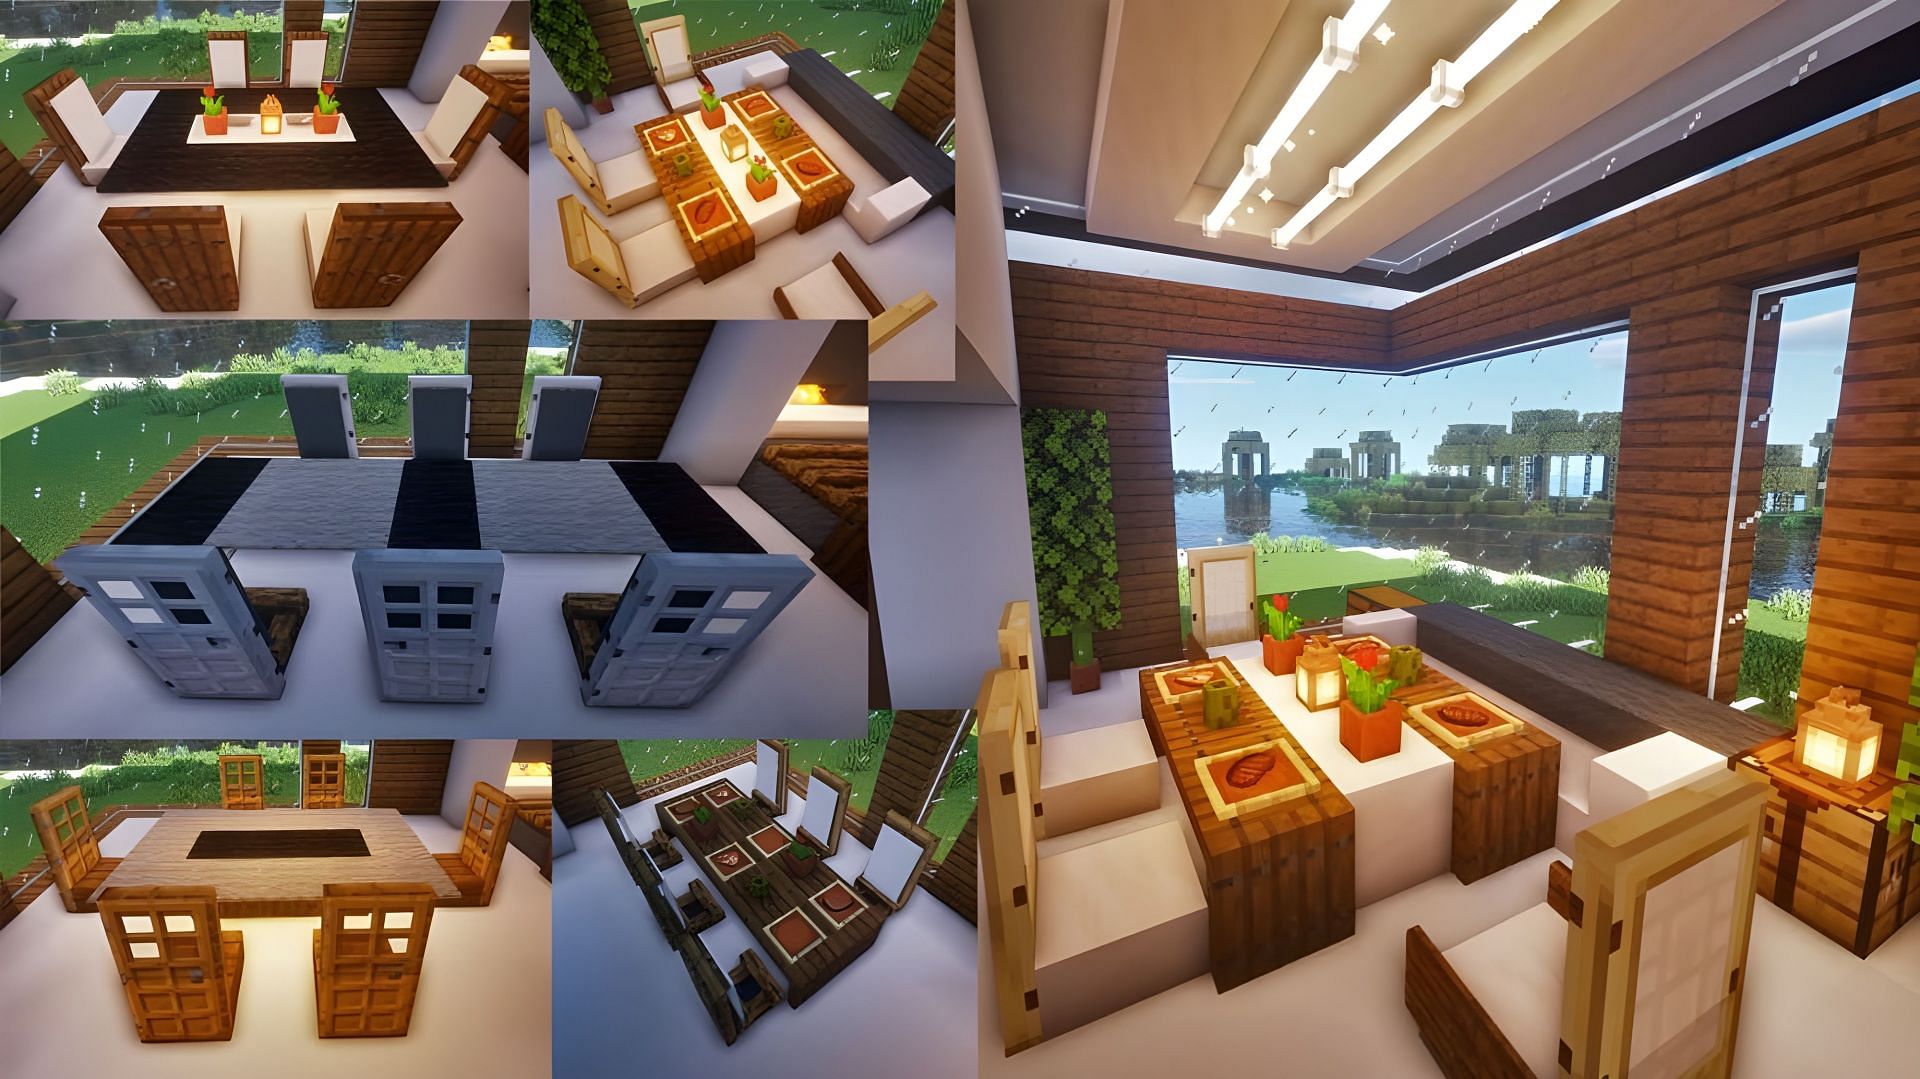 A dining room is a necessary part of your Minecraft home (Image via Youtube/6tenstudio)